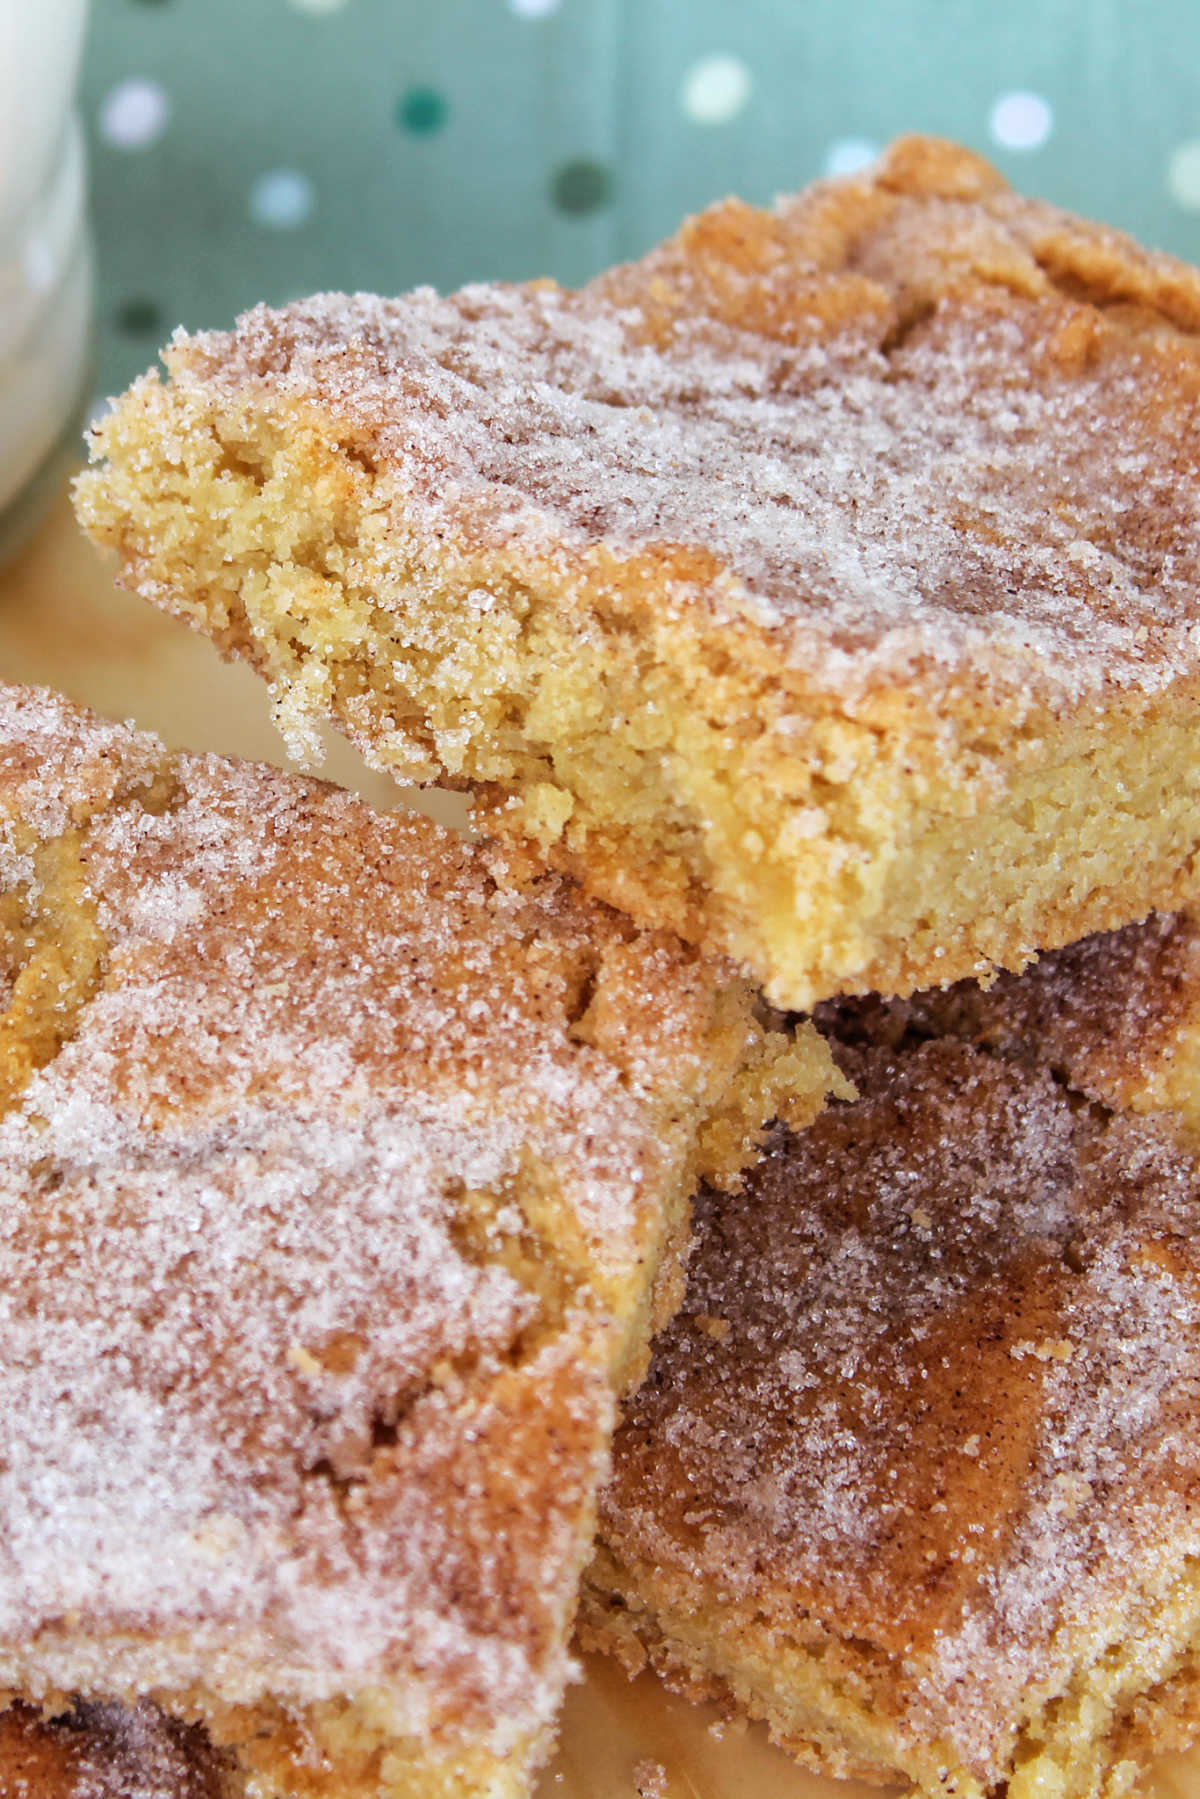 Pile of snickerdoodle bars with cinnamon sugar dusted on top.